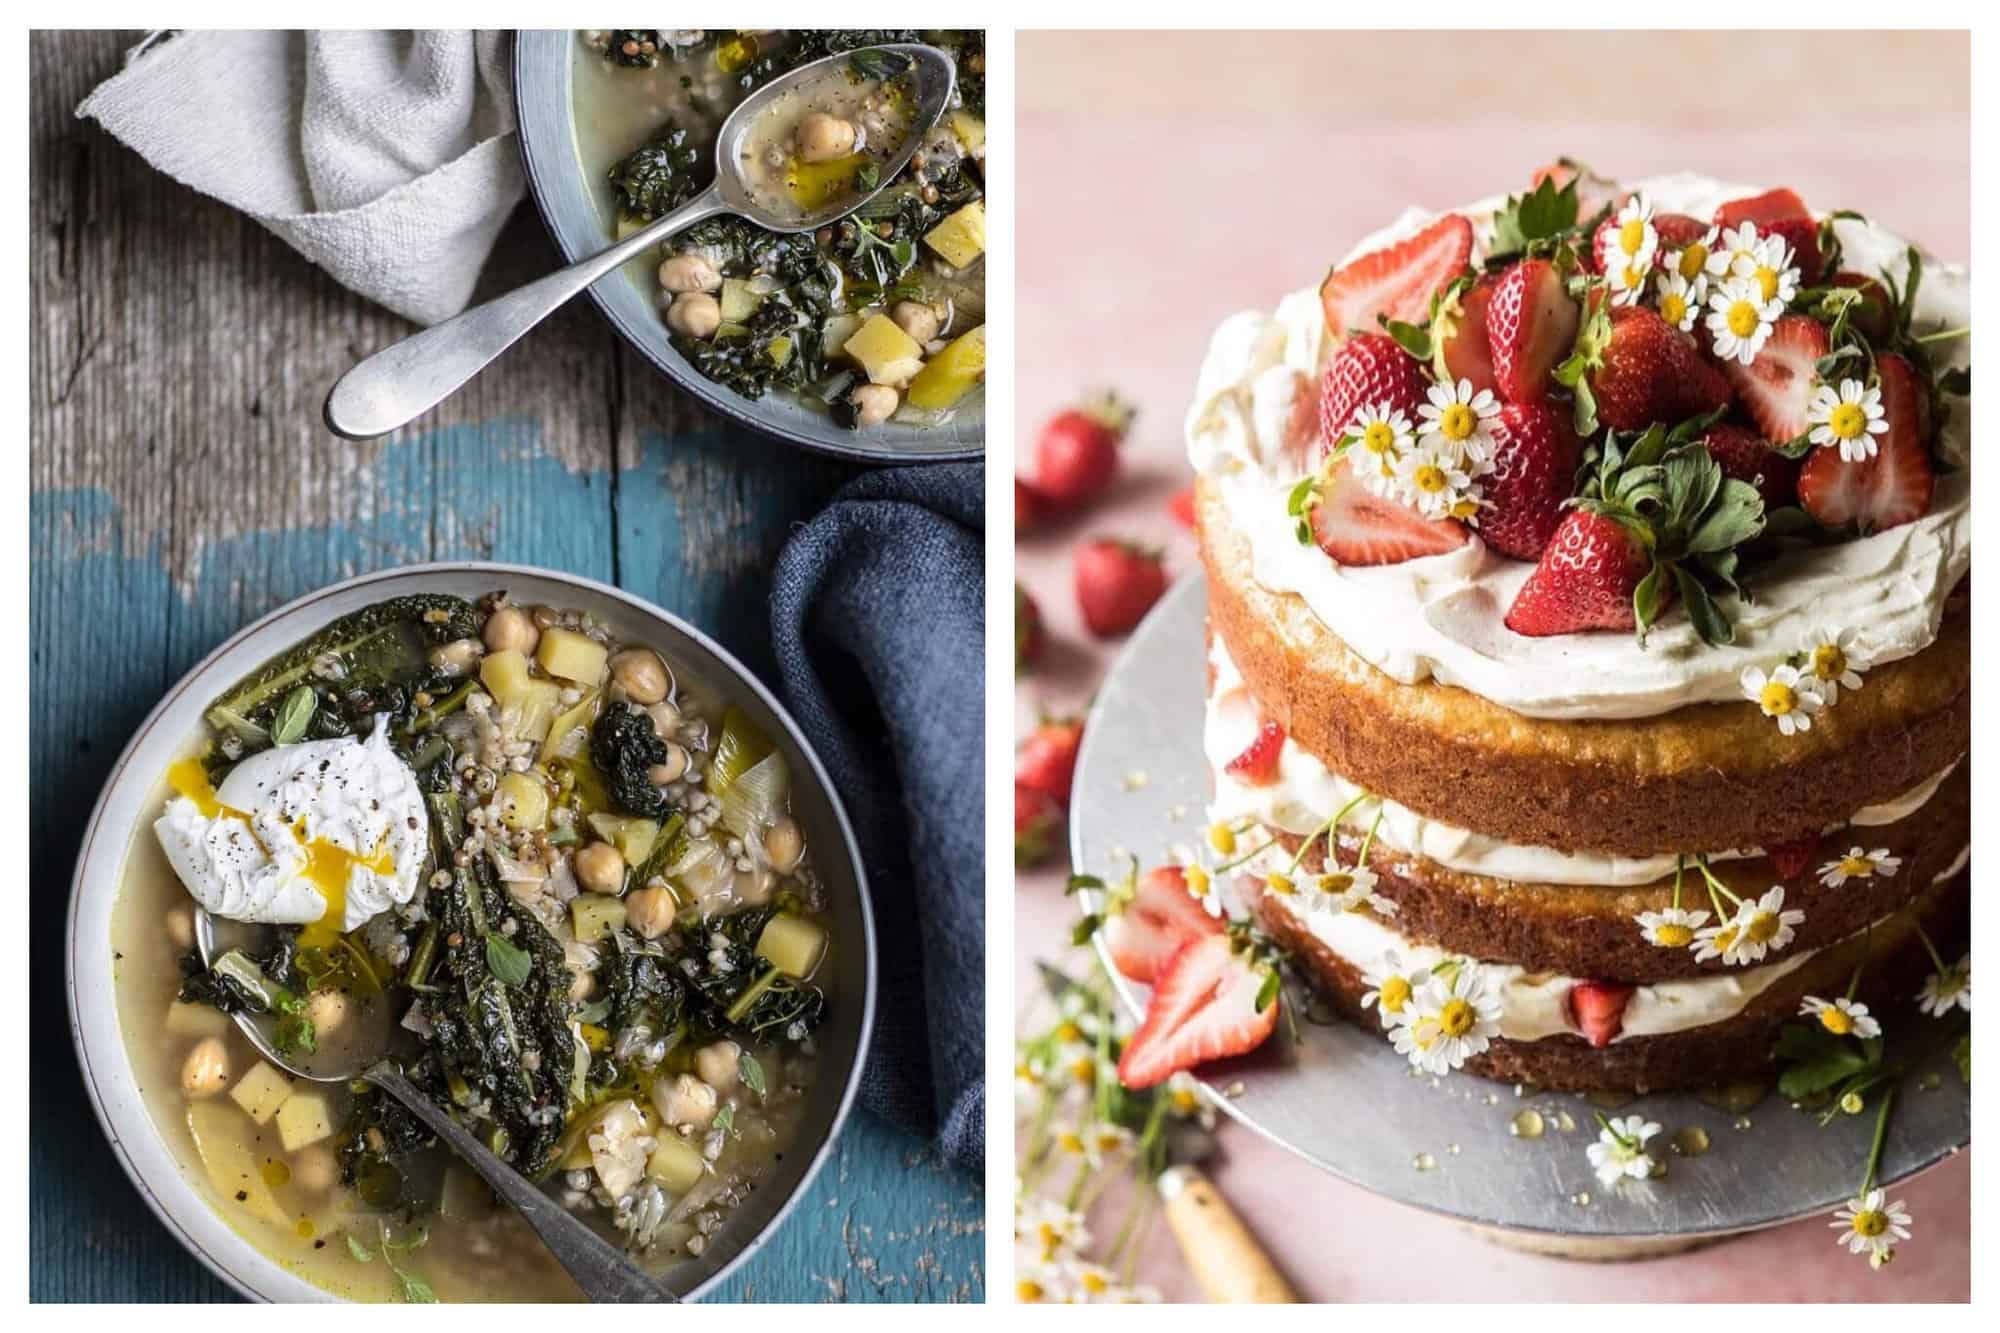 Left: Two bowls of minestrone soup. Right: A strawberry shortcake decorated with yellow daisies and strawberries. 